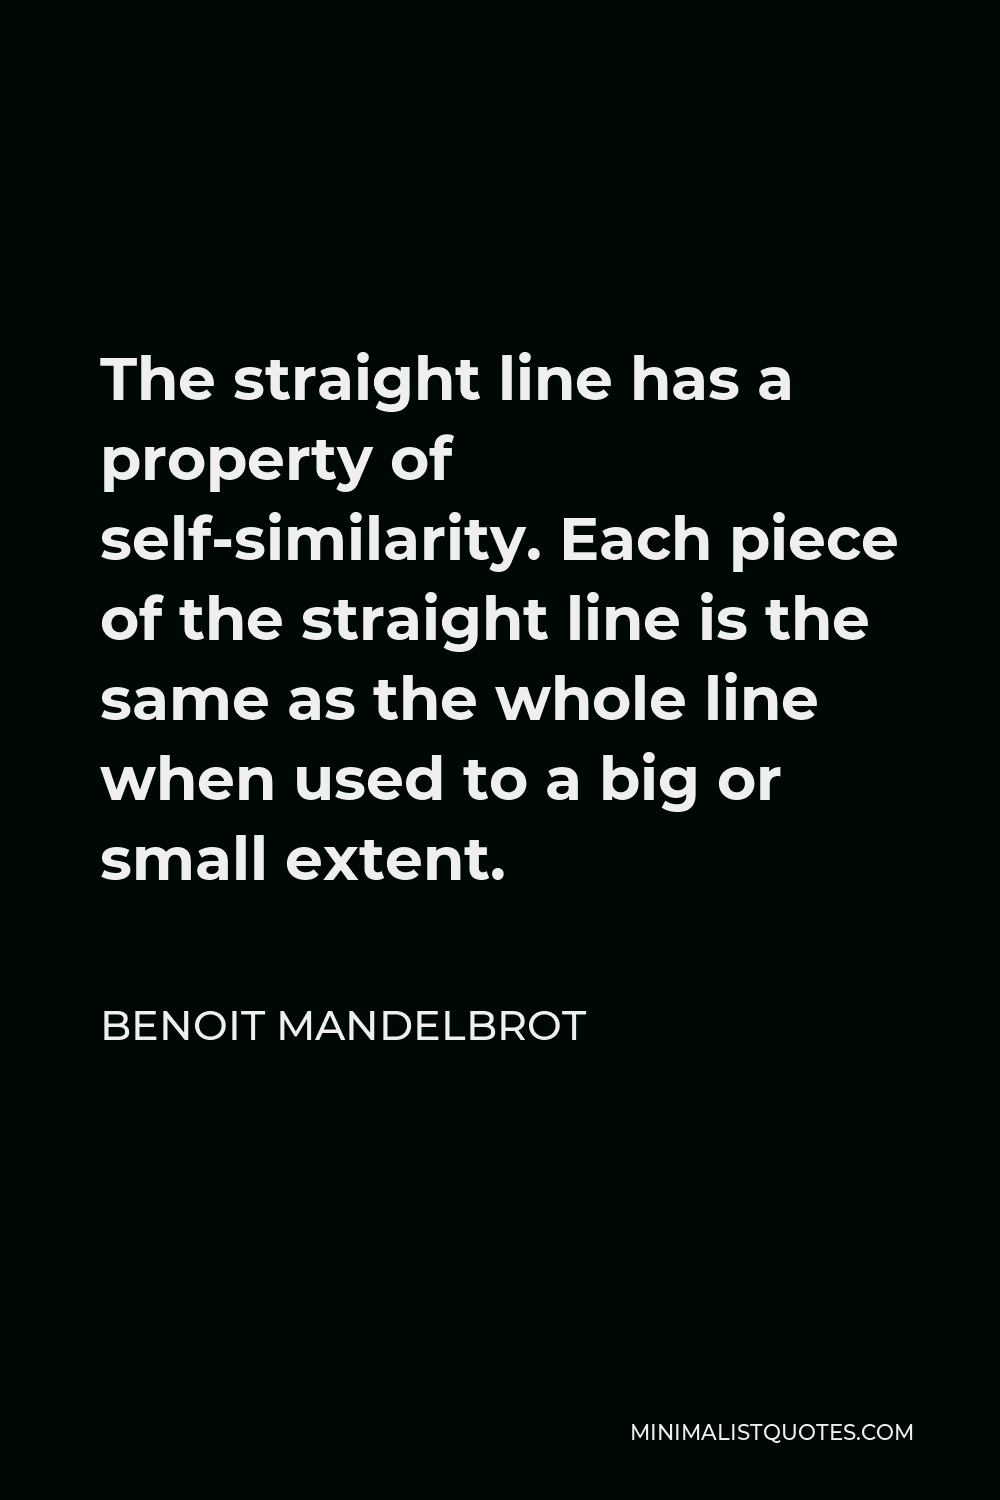 Benoit Mandelbrot Quote - The straight line has a property of self-similarity. Each piece of the straight line is the same as the whole line when used to a big or small extent.